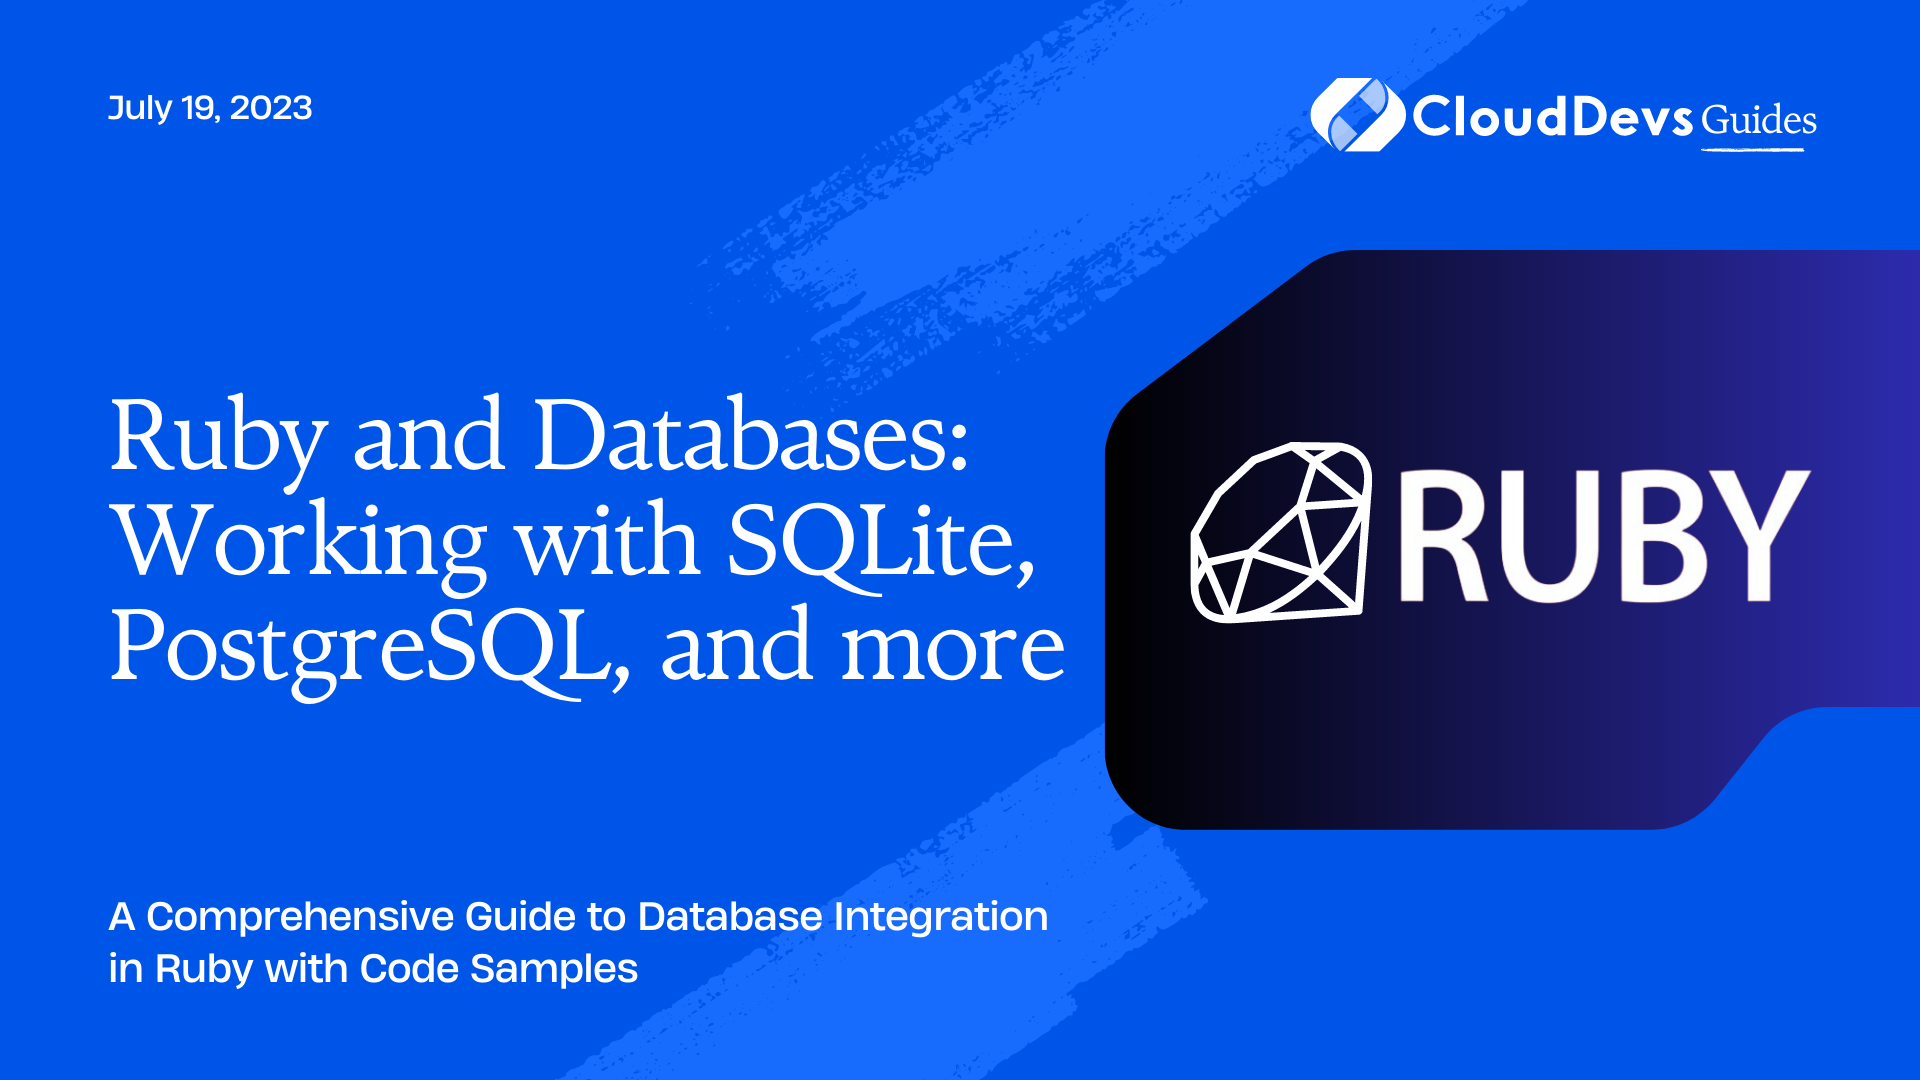 Ruby and Databases: Working with SQLite, PostgreSQL, and more